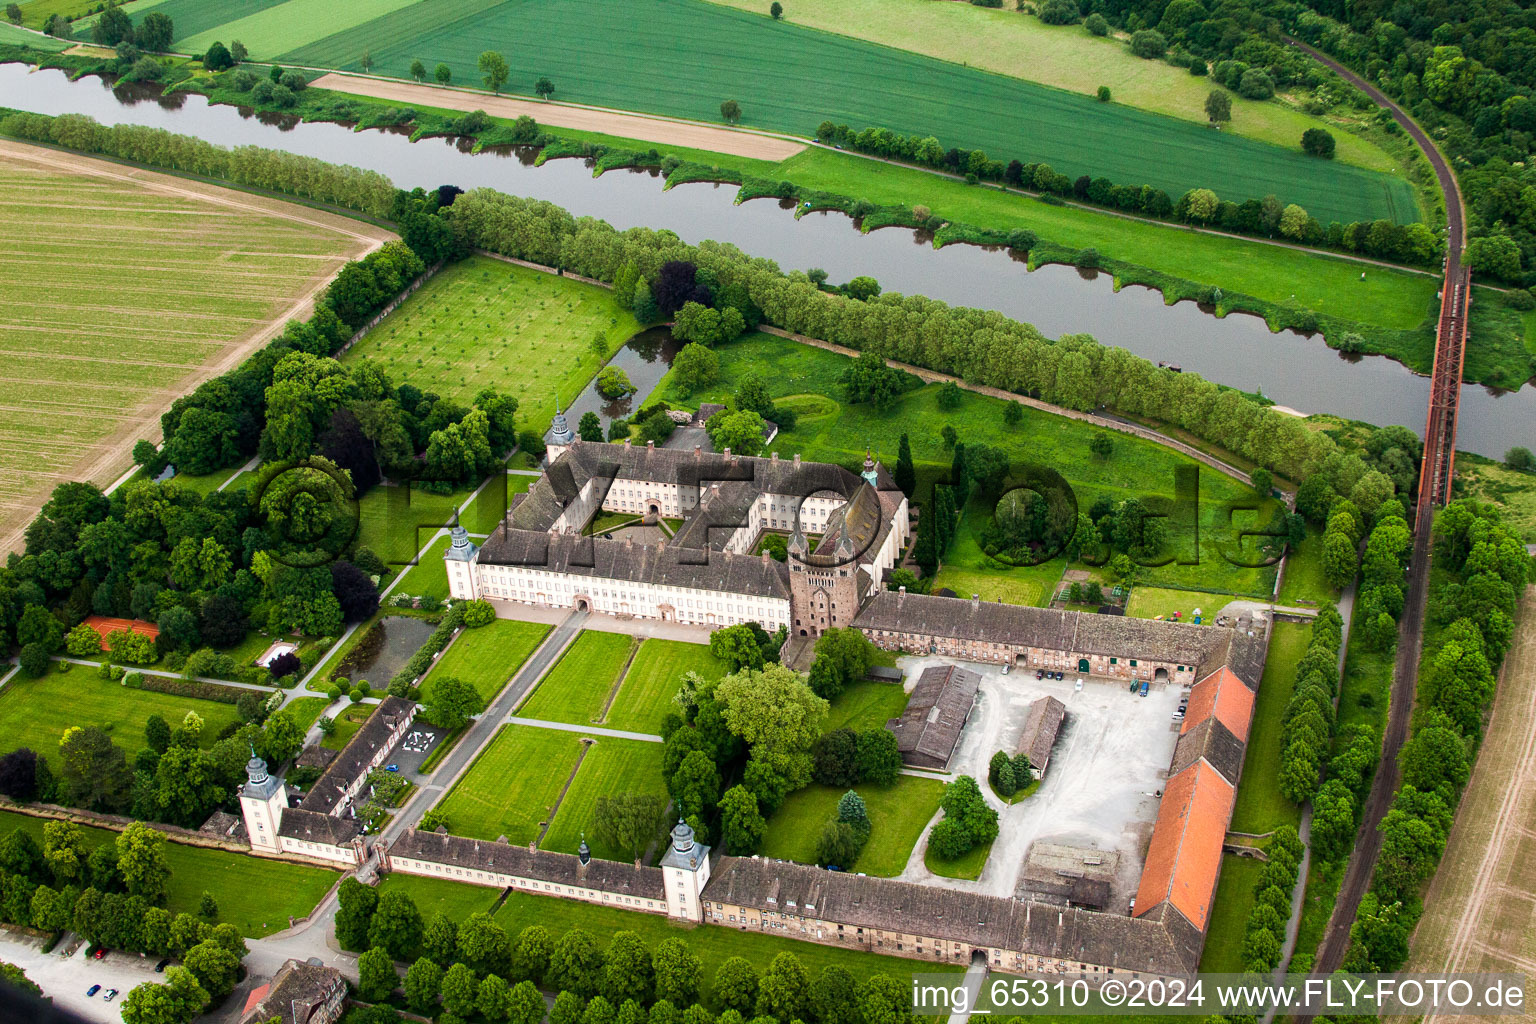 Aerial view of Complex of buildings of the monastery Schloss/Kloster Corvey (UNESCO Weltkulturerbe) in Hoexter in the state North Rhine-Westphalia, Germany